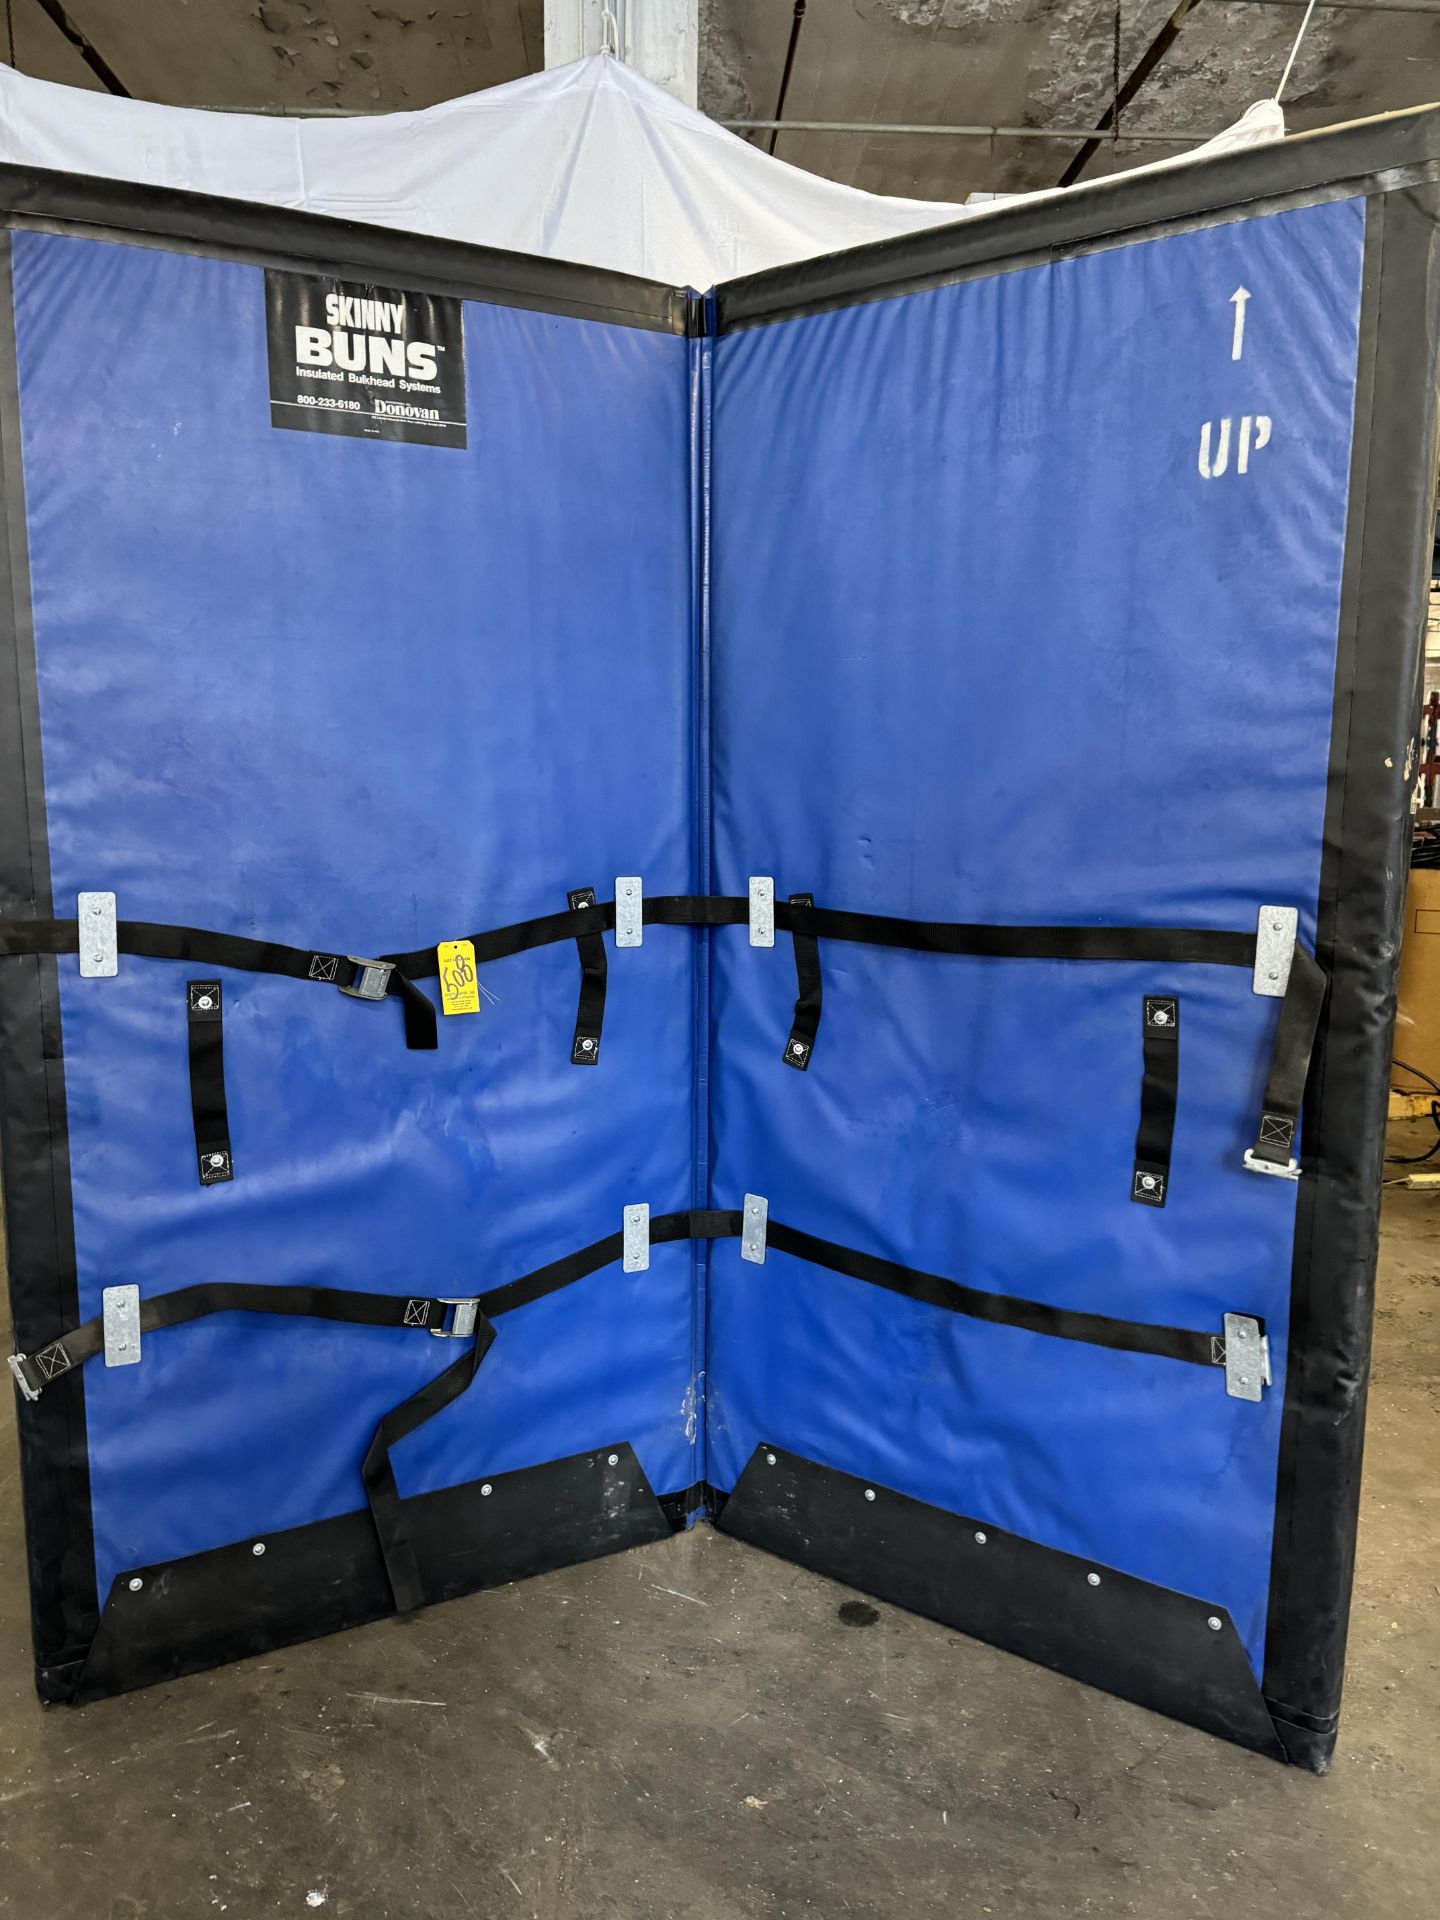 (1) Skinny Buns Insulated Bulkhead for Refrigerated Trucks, (2) Panel, 92" H x 44" W Per Panel